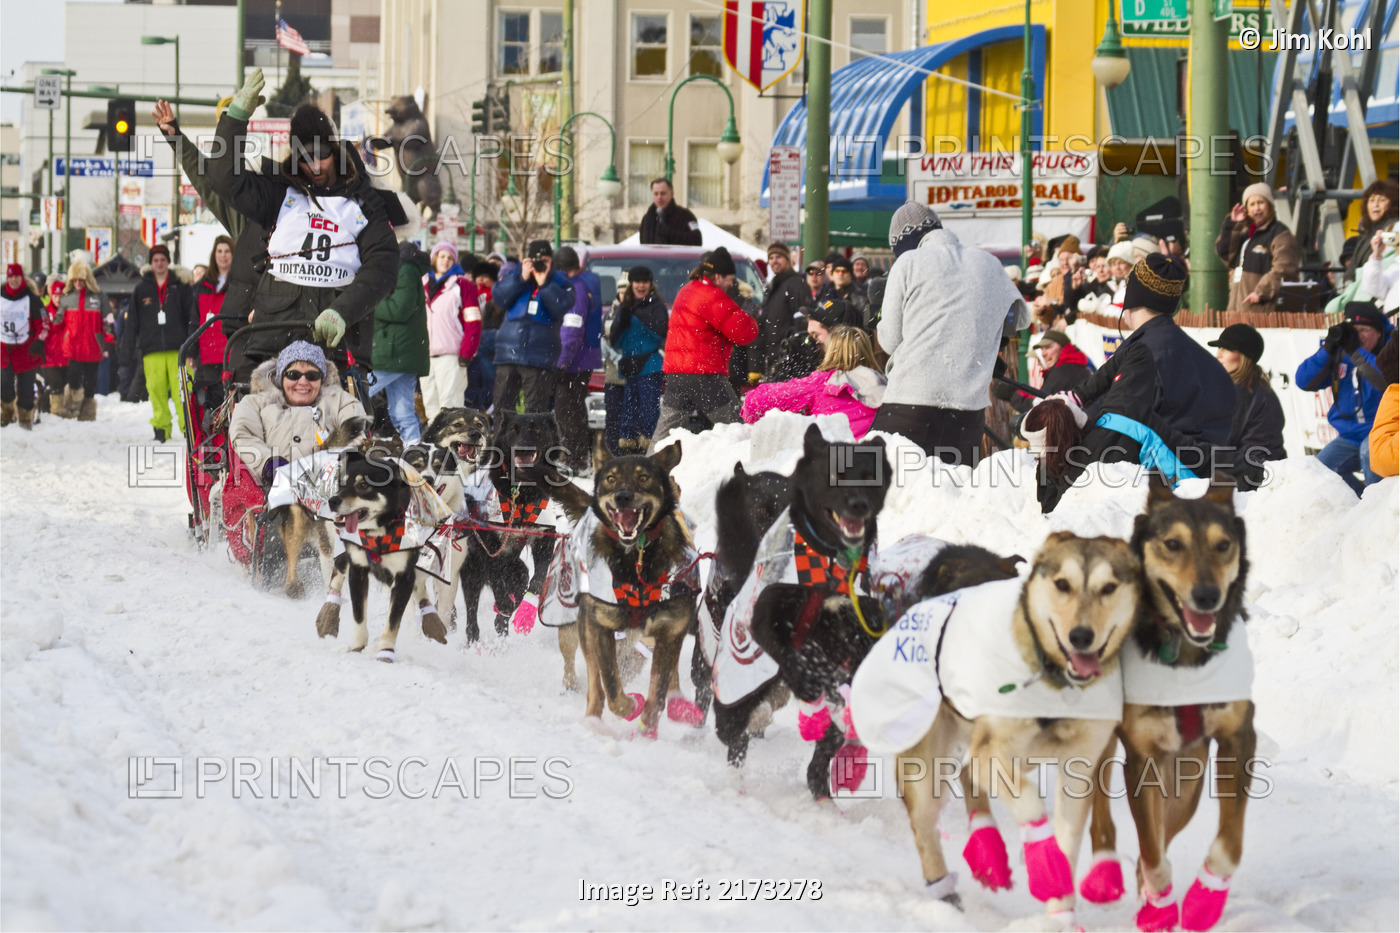 Lance Mackey Leaving The Starting Line At The Ceremonial Start 2010 Iditarod In ...